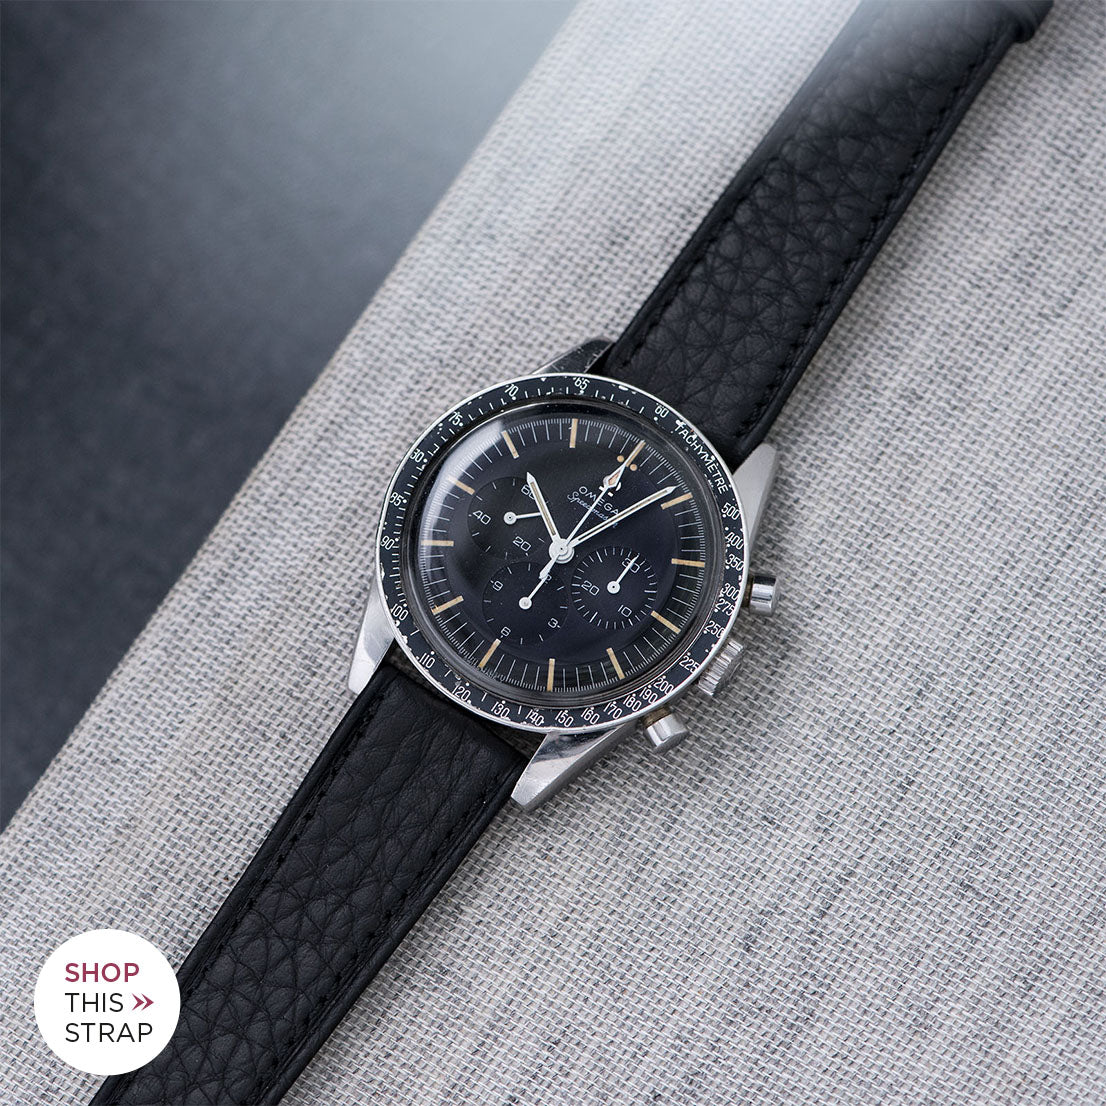 Bulang and Sons_Strap Guide_The Omega Straight Lugs speedmaster_Taurillon Black Speedy Leather Watch Strap